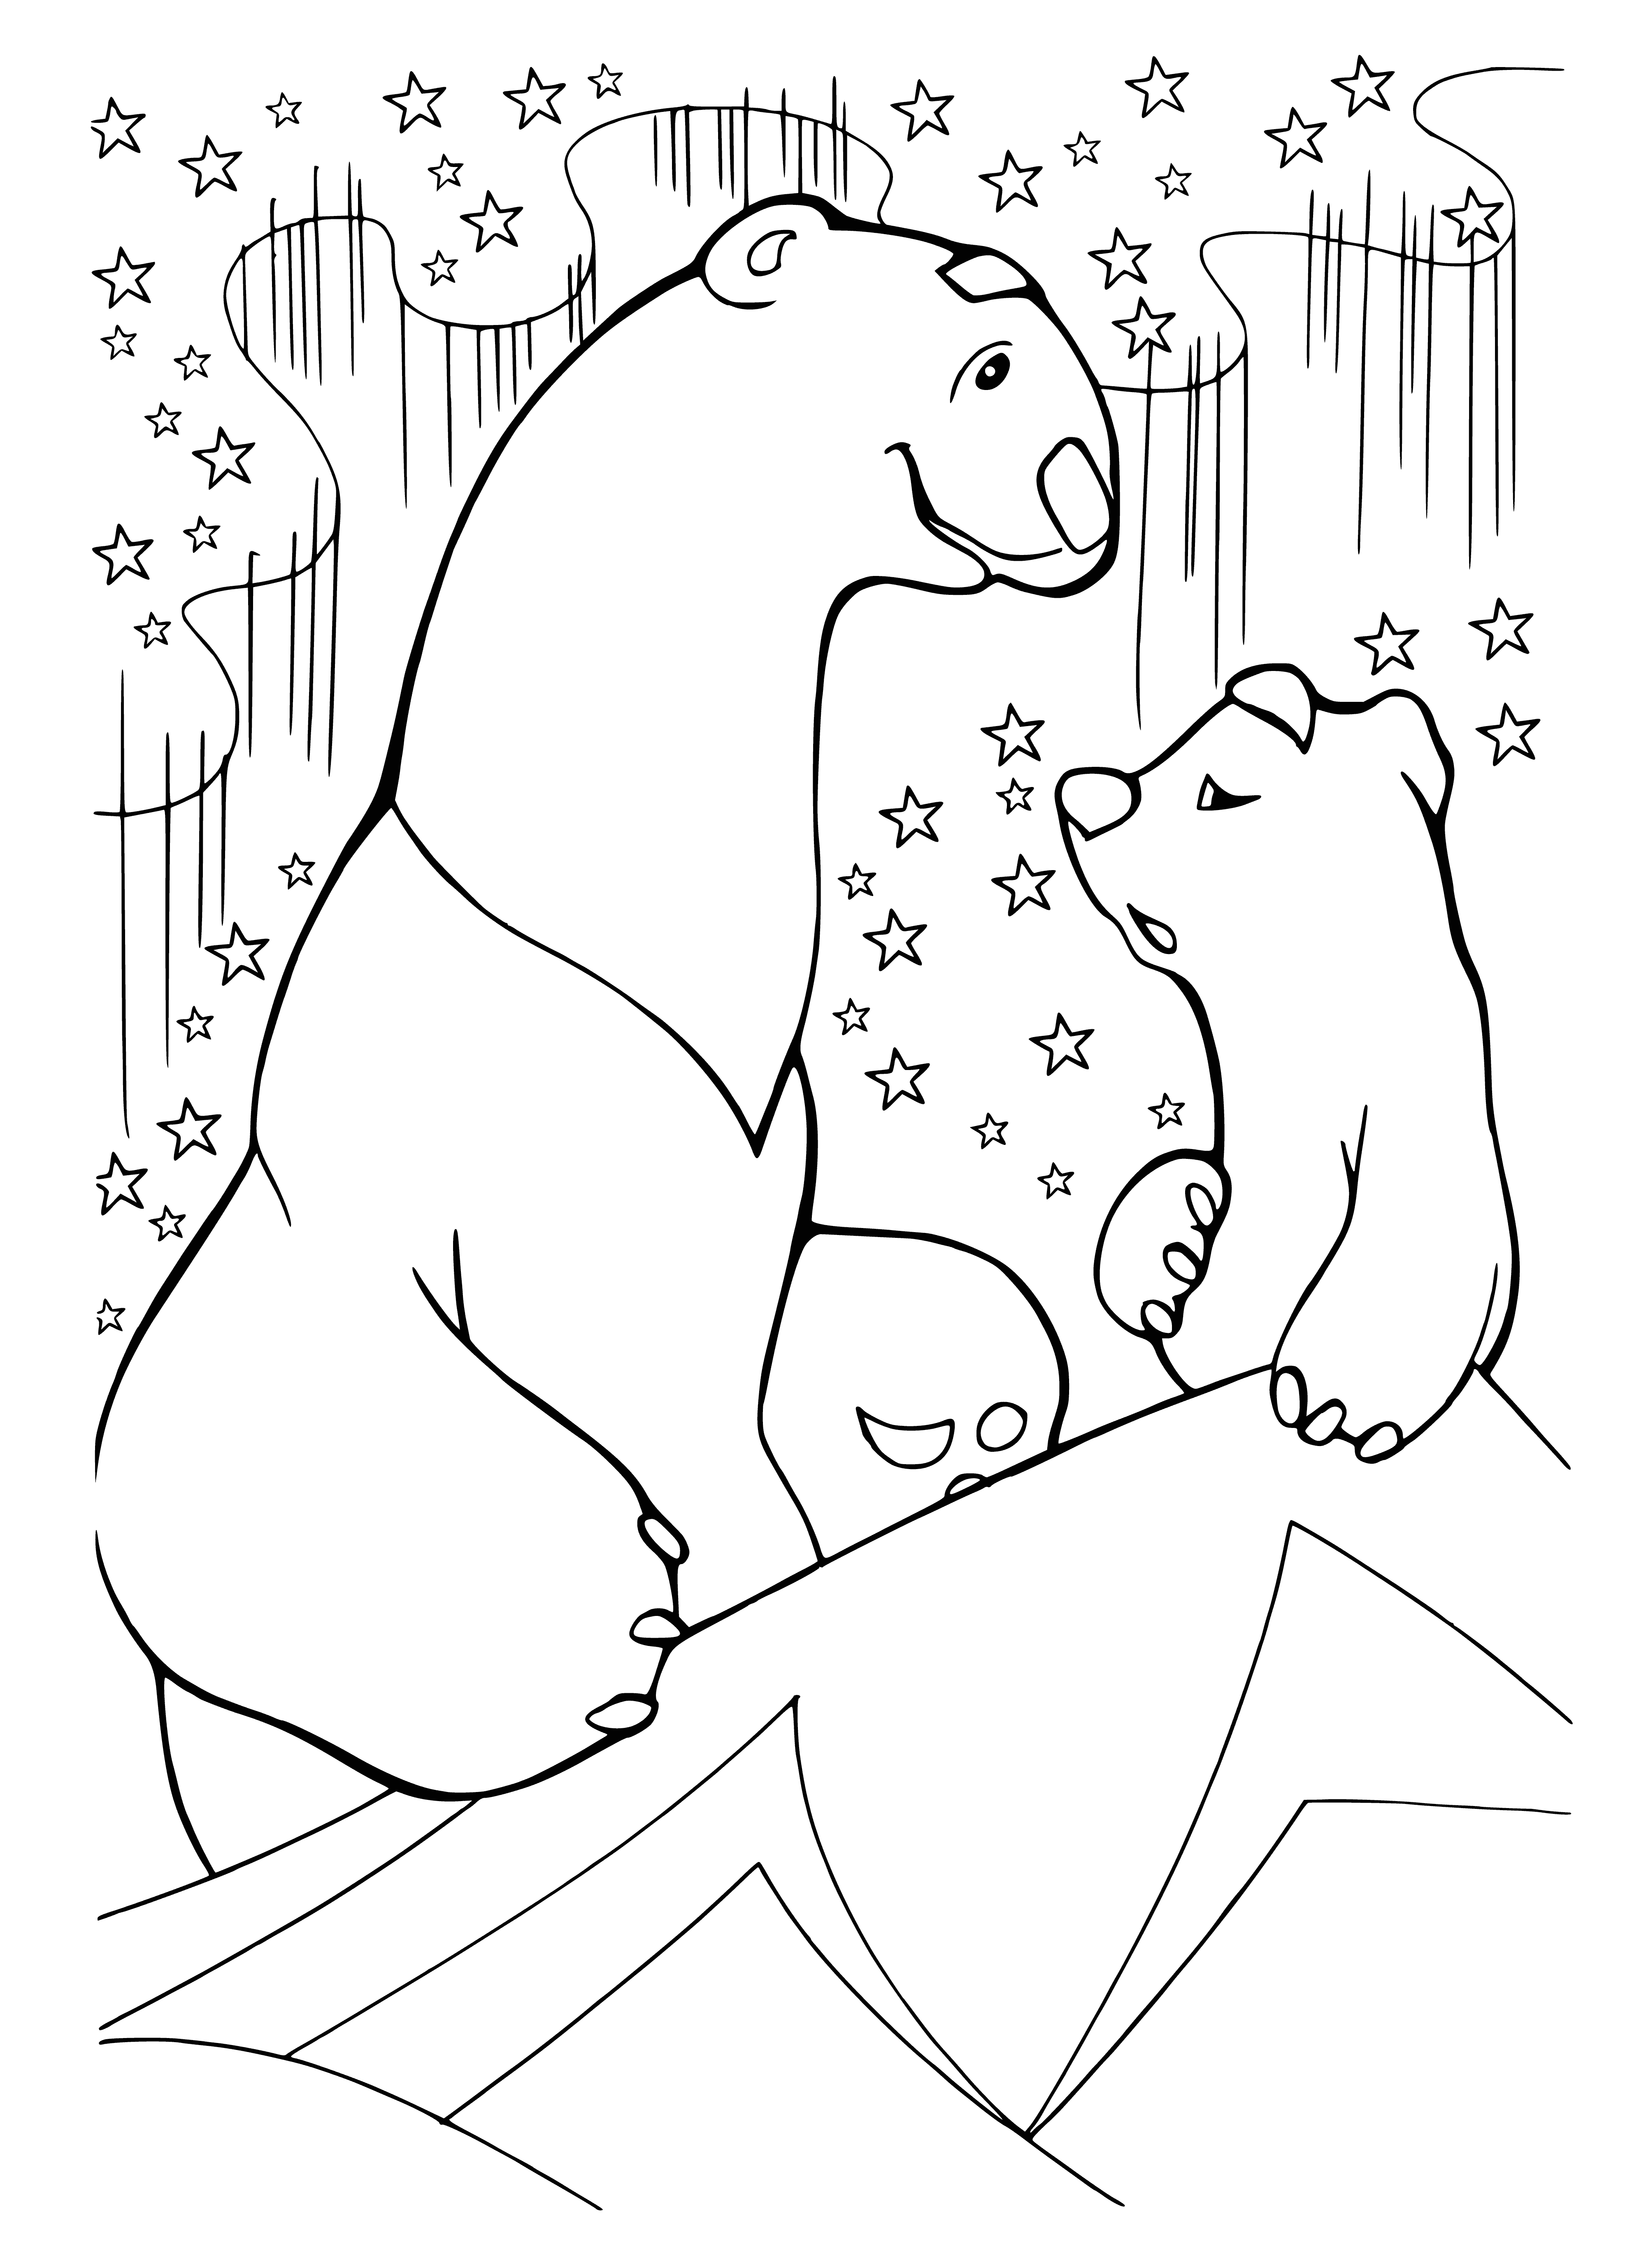 coloring page: Mother bear protects her cub in a loving embrace, radiating happiness and contentment.